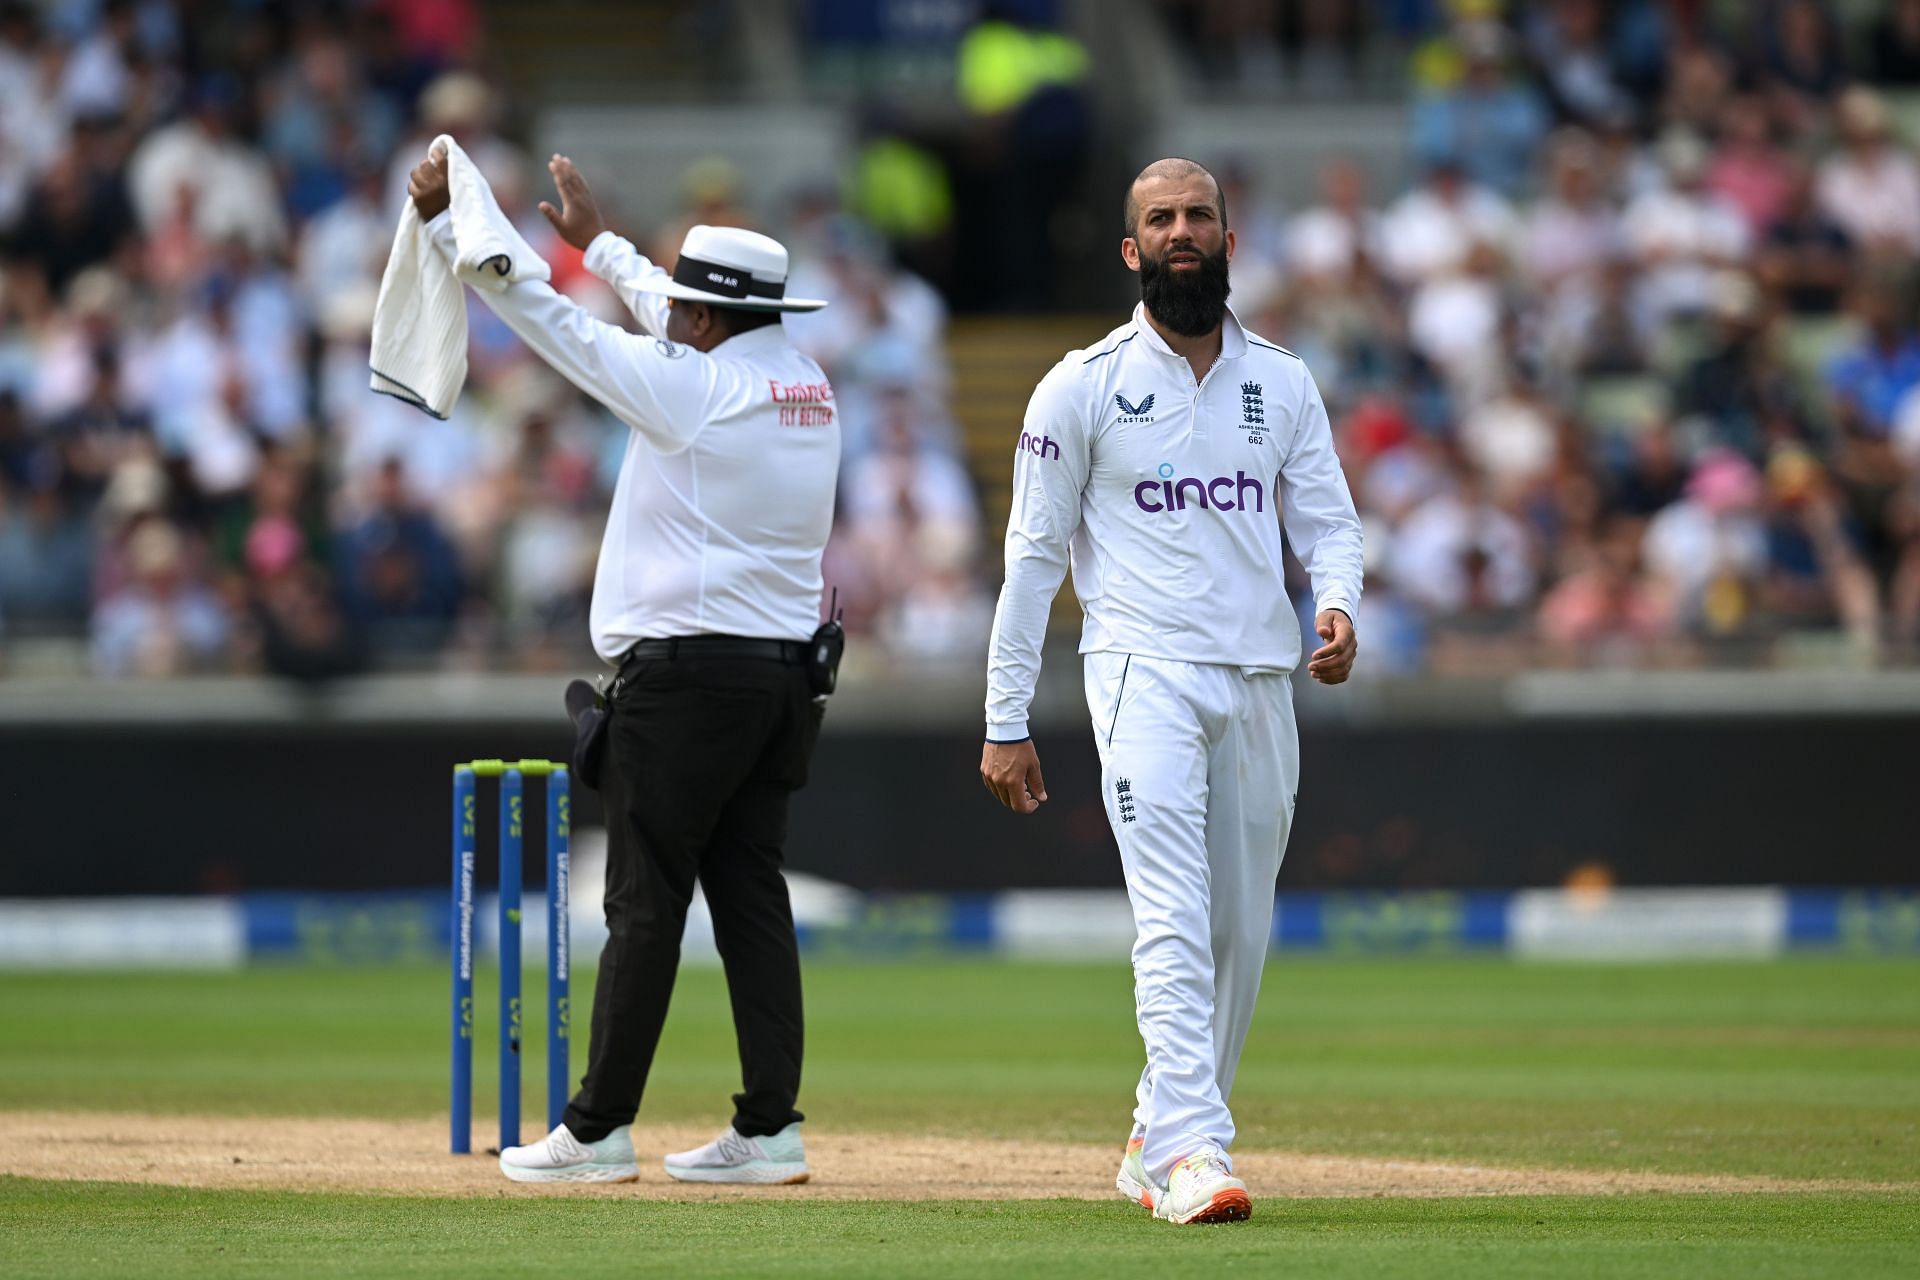 Moeen Ali was troubled by blisters on his finger.